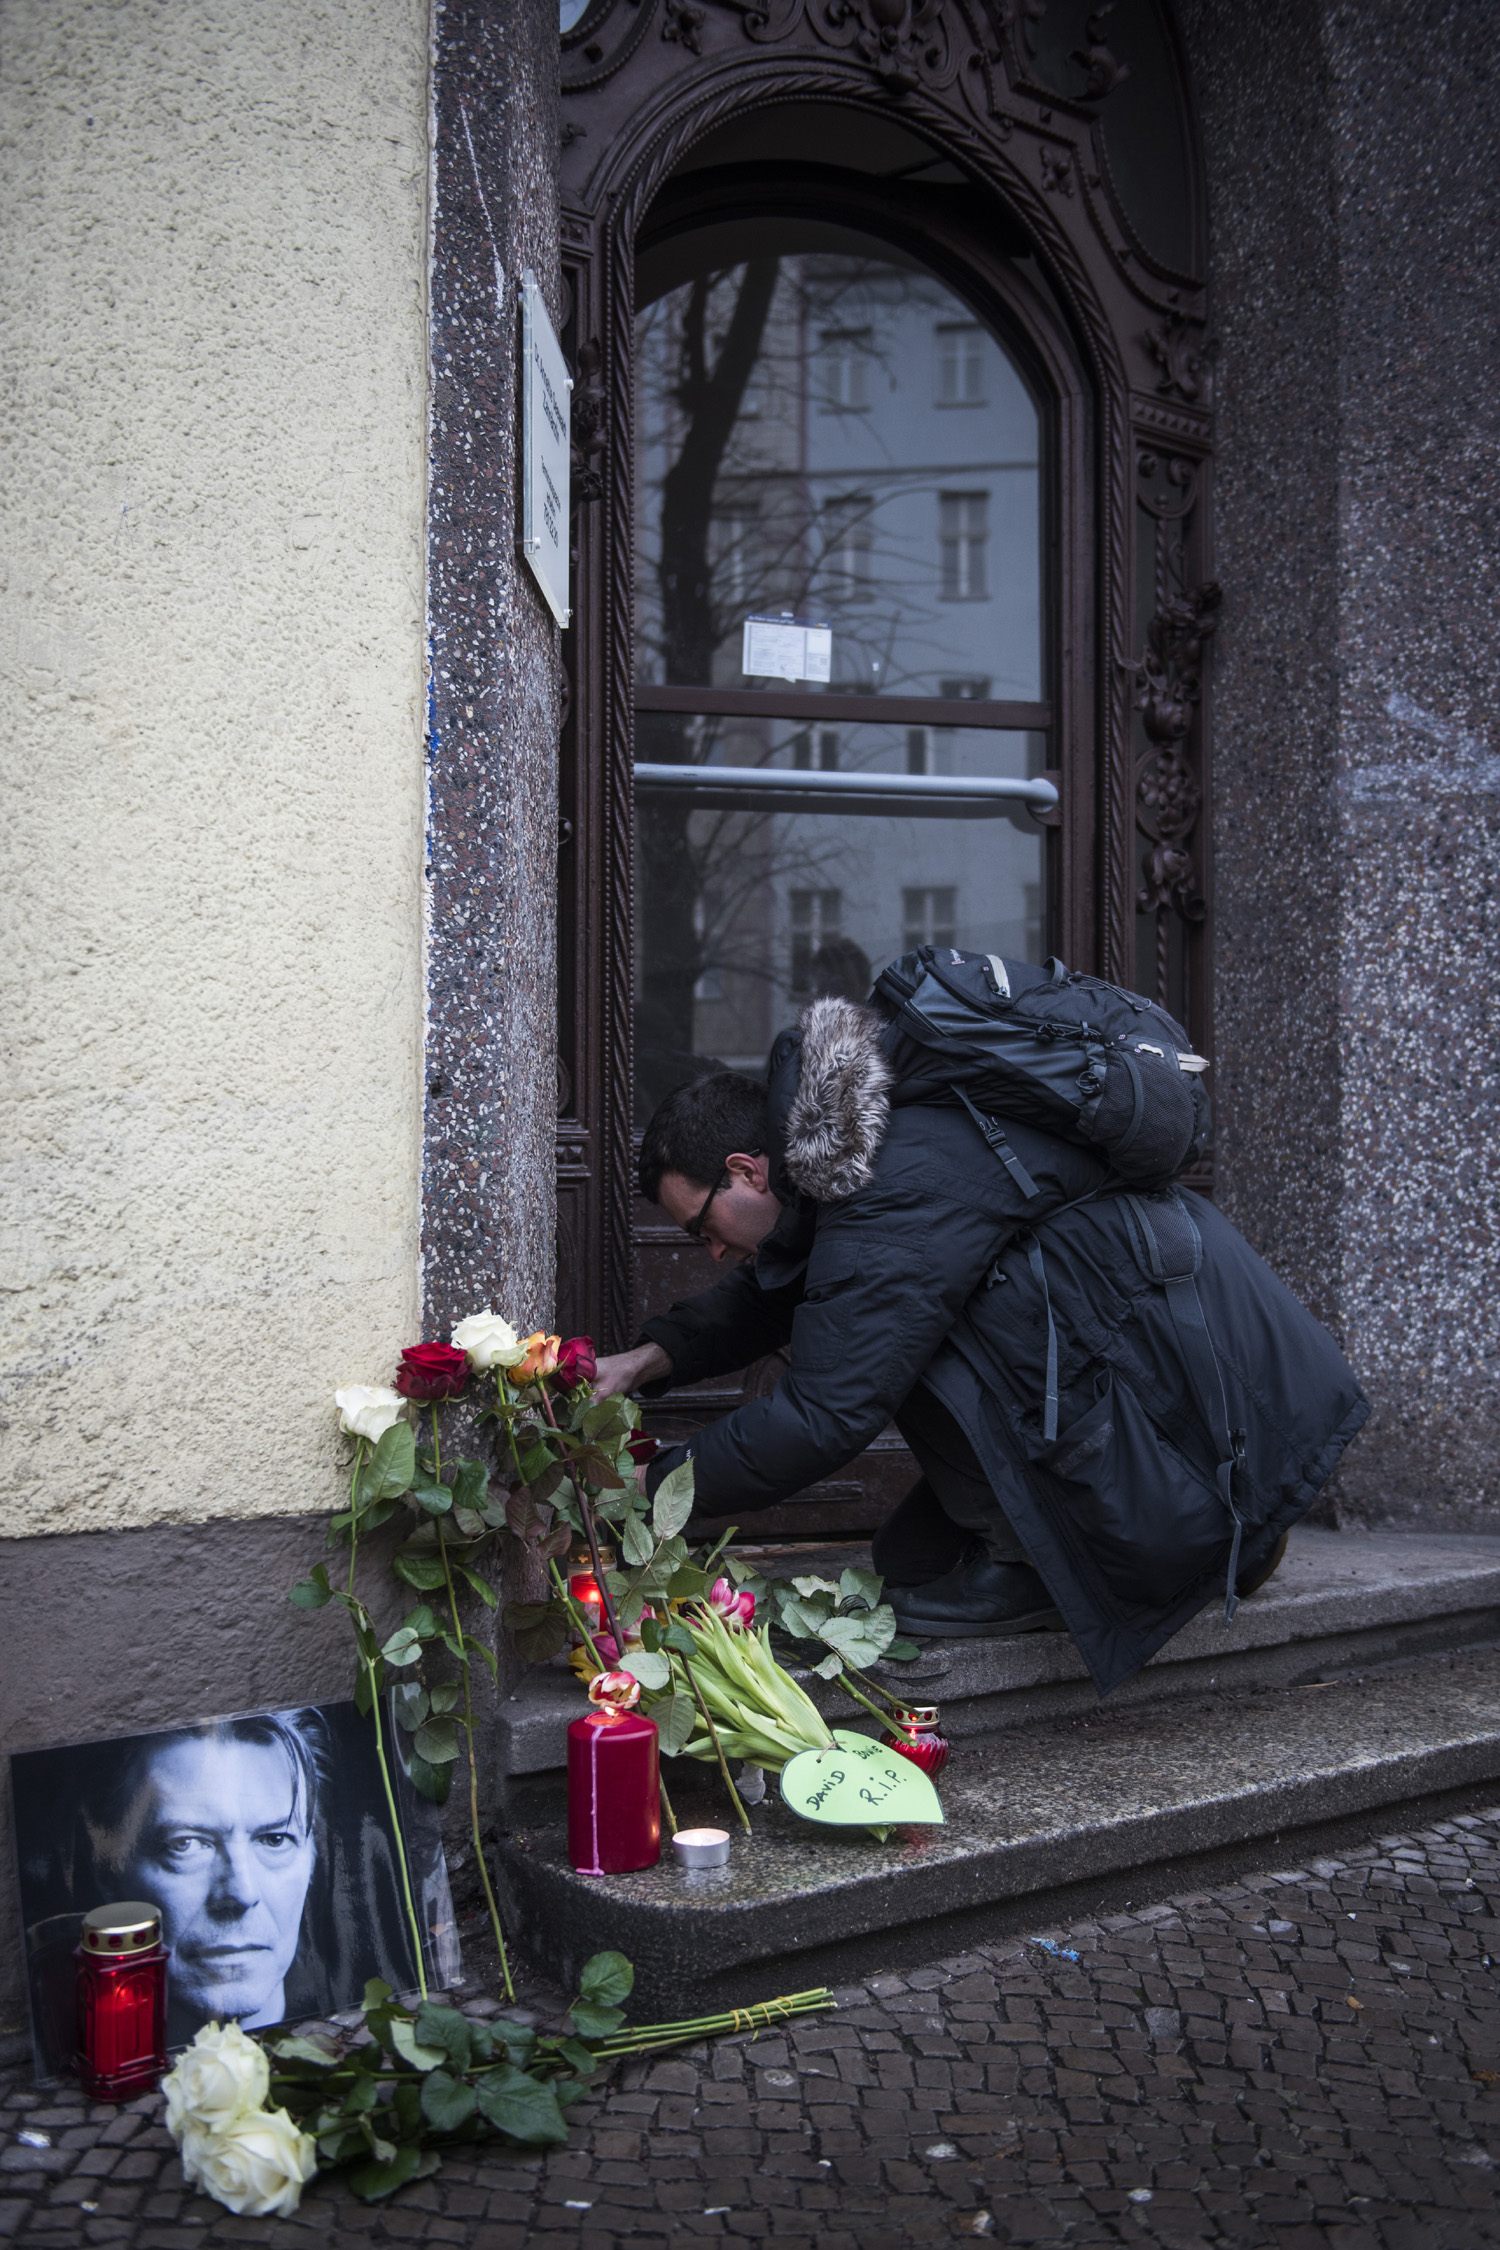 David-Bowie-fan Jamie Young puts down a tribute to British rock legend David Bowie outside his former home in Berlin's Hauptstrasse 155 on January 11, 2016. British rock music legend David Bowie has died after a long battle with cancer, his official Twitter and Facebook accounts said. / AFP / ODD ANDERSEN